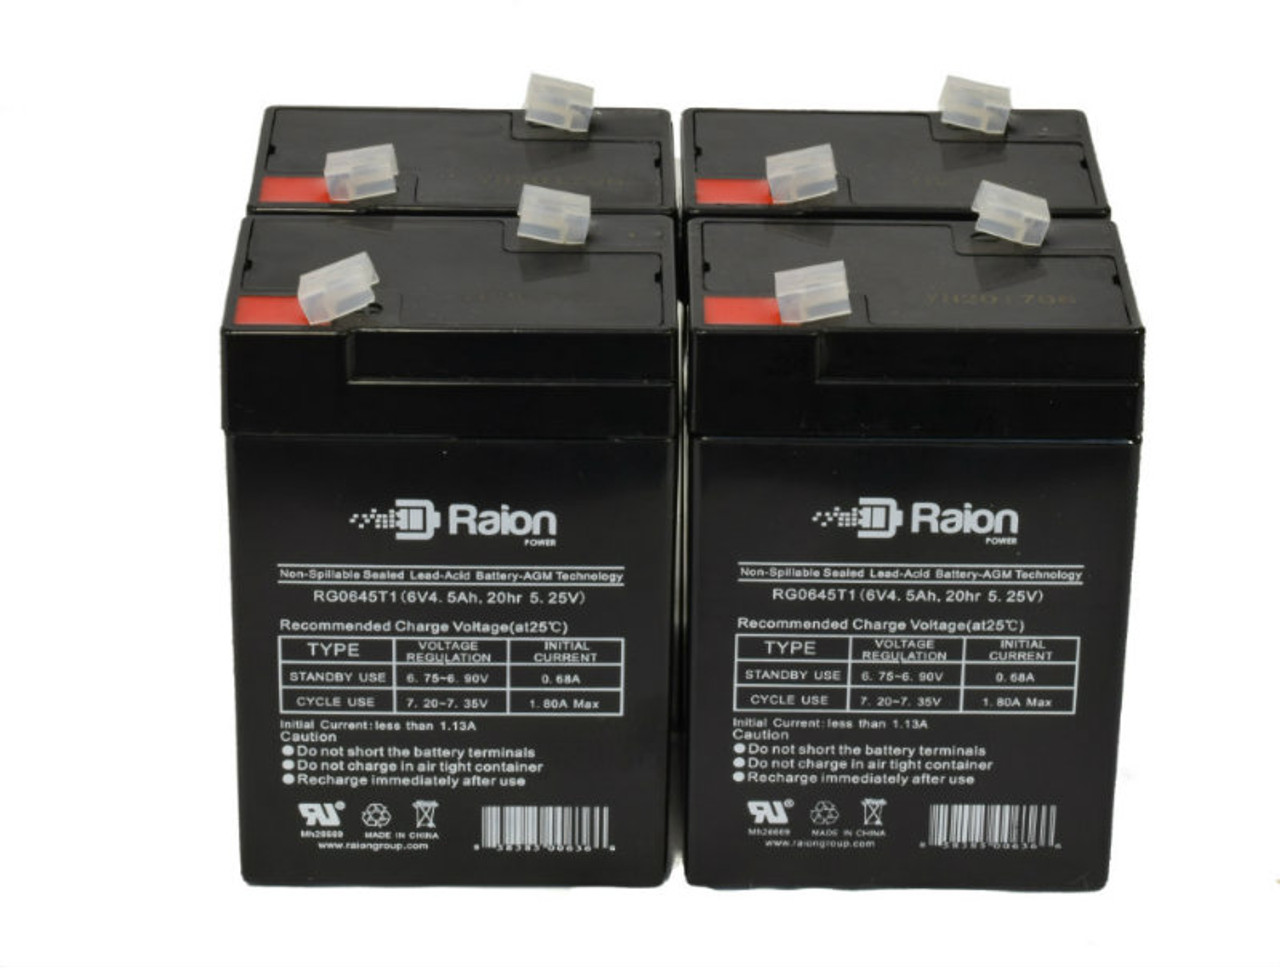 Raion Power 6V 4.5Ah Replacement Emergency Light Battery for Lithonia AS - 4 Pack